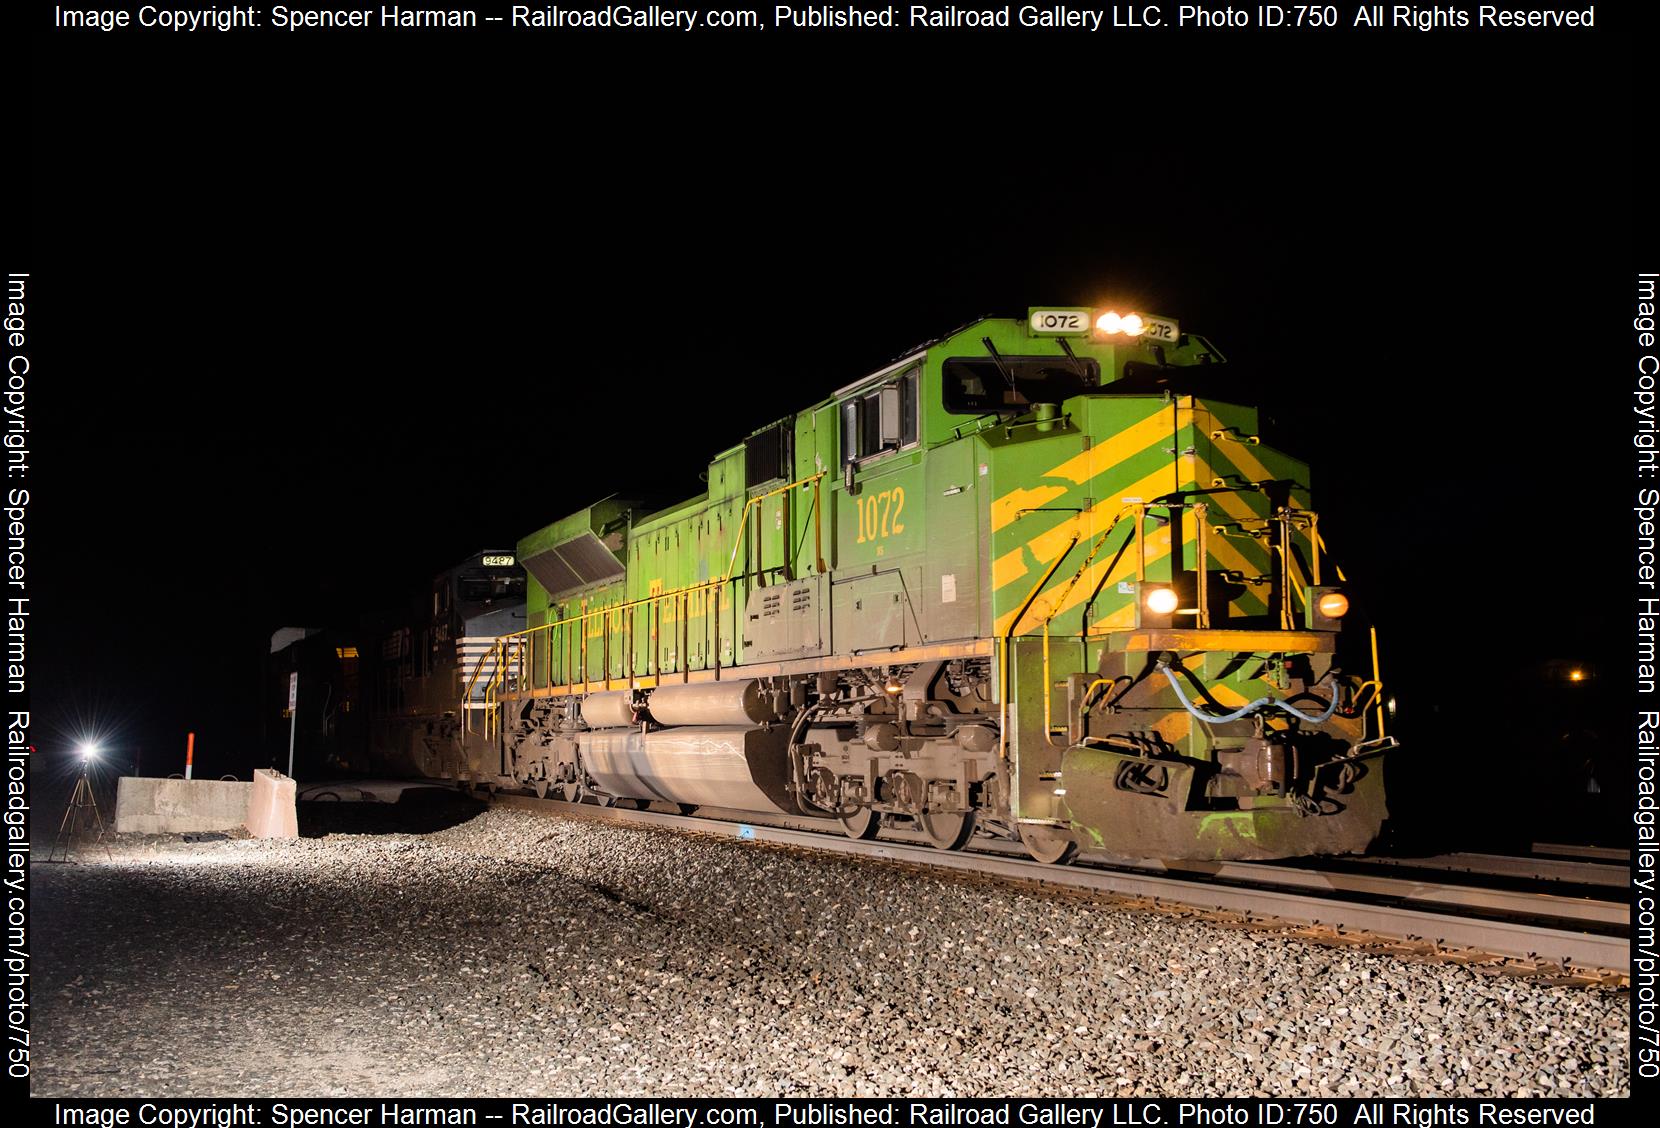 NS 1072 is a class EMD SD70ACe and  is pictured in Lydick, Indiana, USA.  This was taken along the Chicago Line on the Norfolk Southern. Photo Copyright: Spencer Harman uploaded to Railroad Gallery on 02/24/2023. This photograph of NS 1072 was taken on Friday, February 24, 2023. All Rights Reserved. 